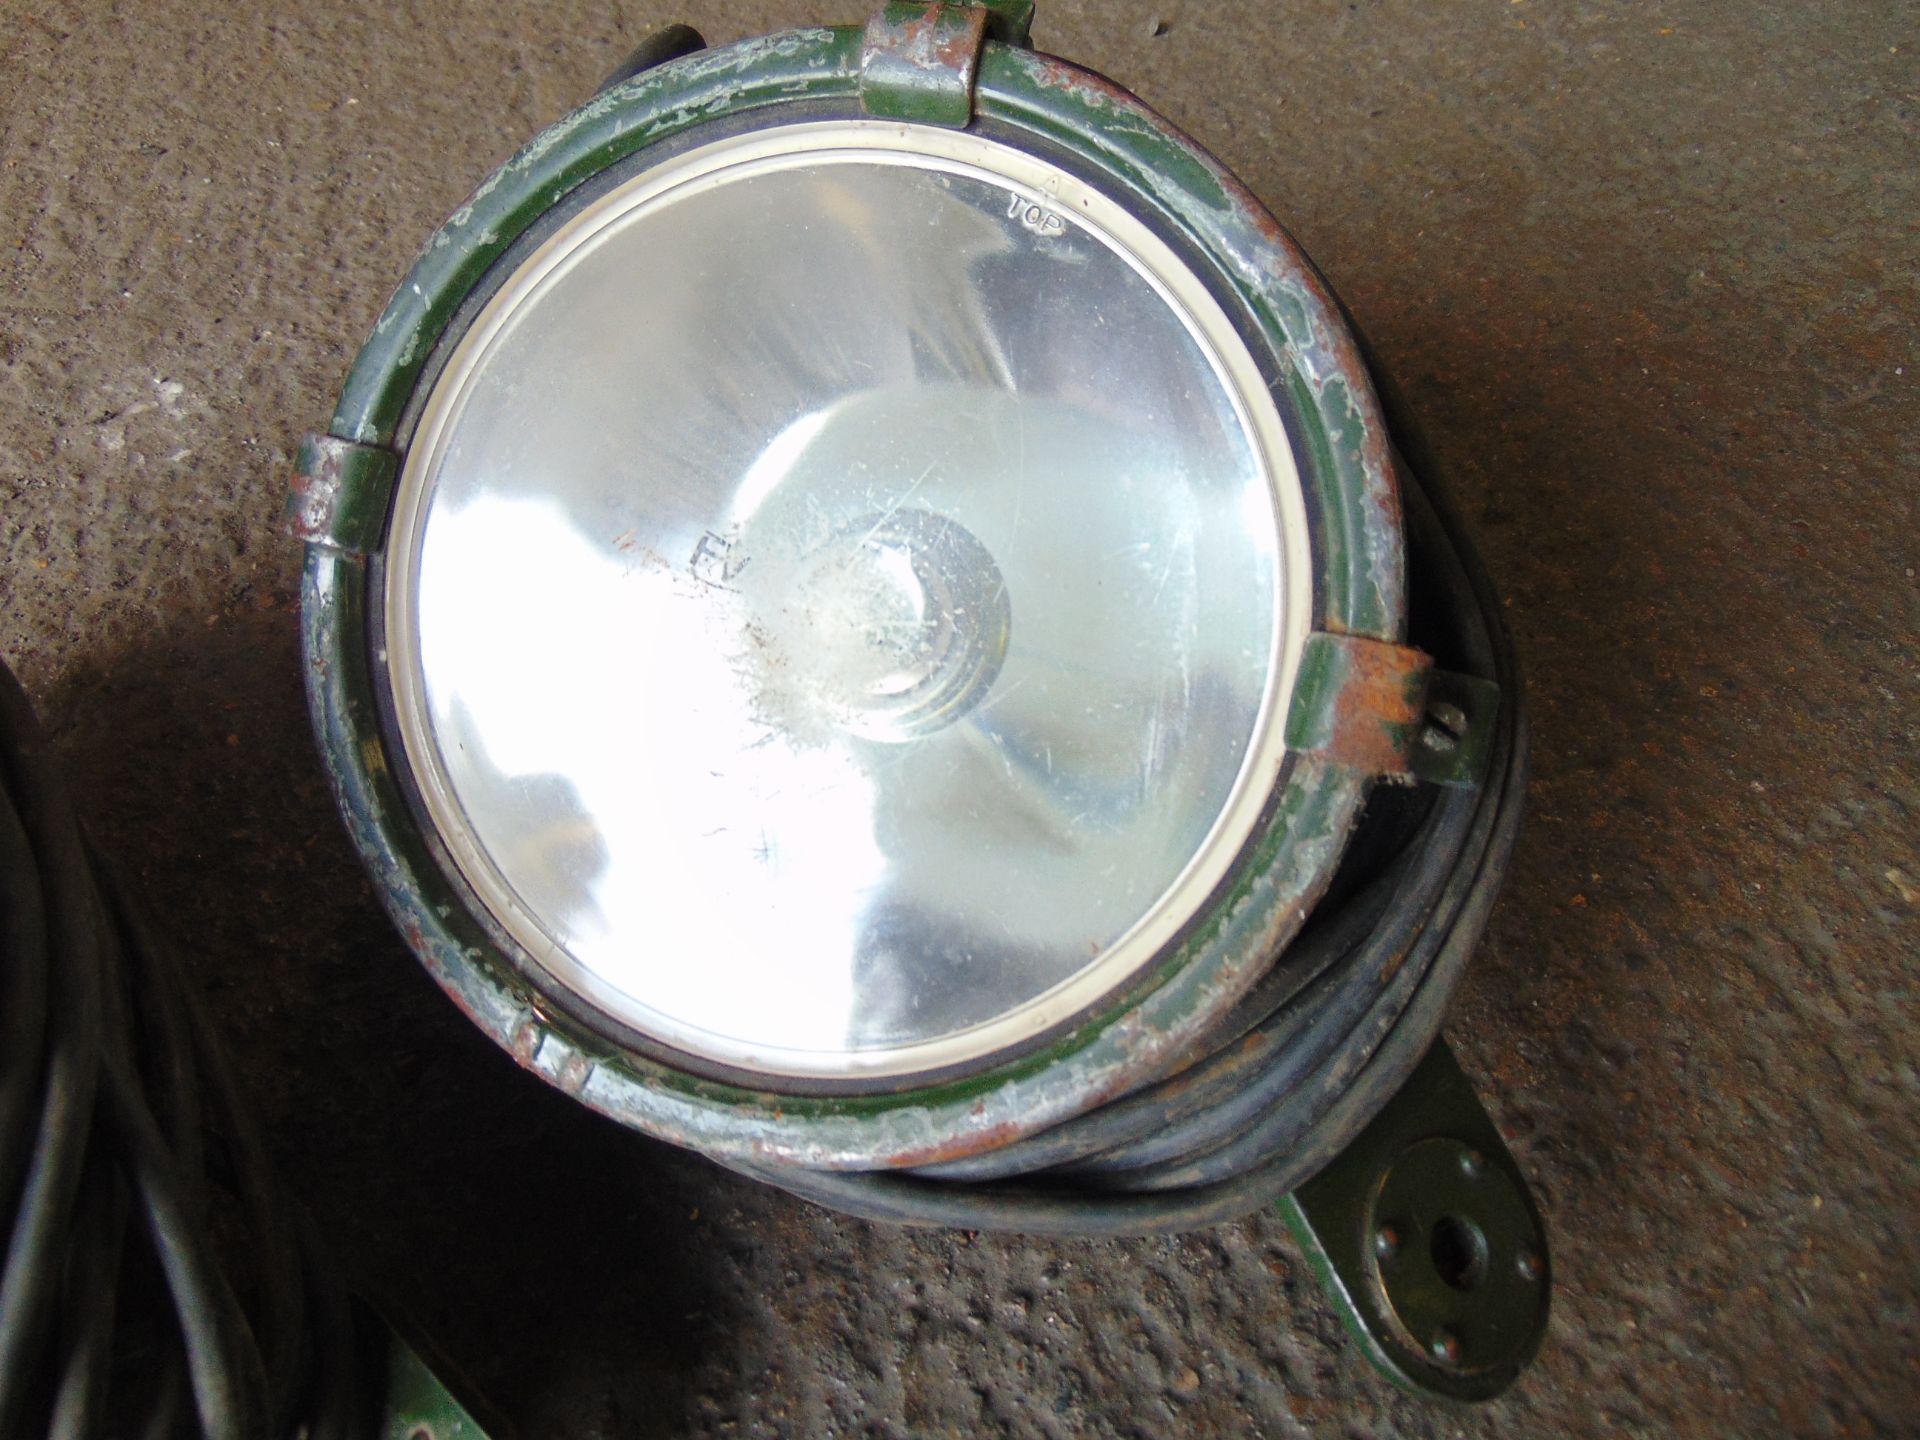 2 x AFV Vehicle Search Lamps - Image 3 of 4